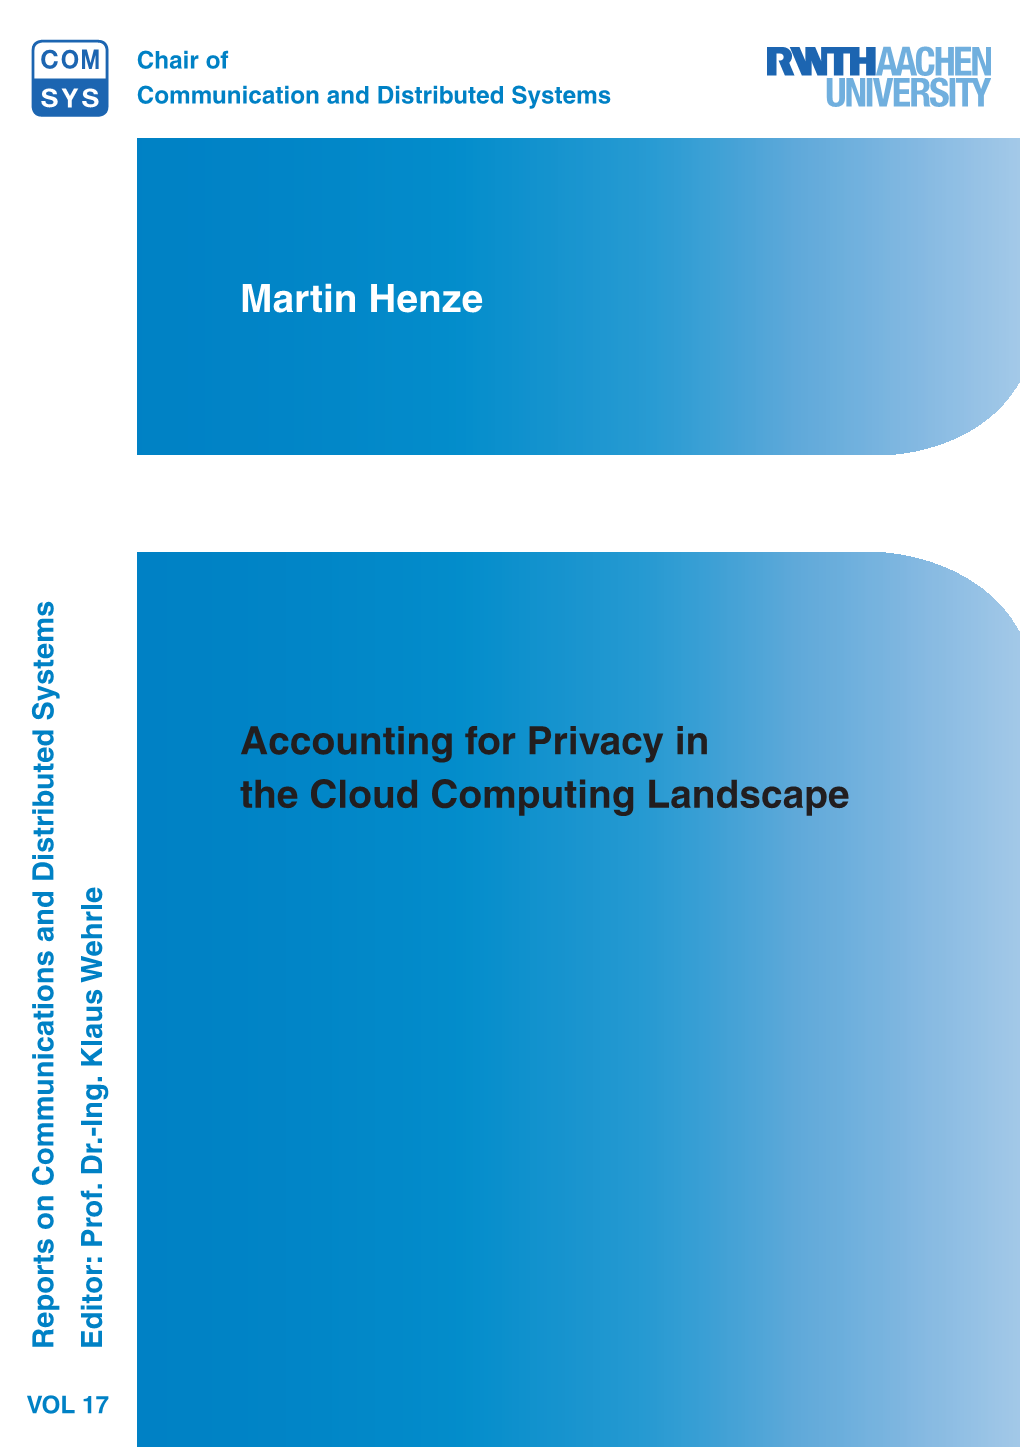 Accounting for Privacy in the Cloud Computing Landscape